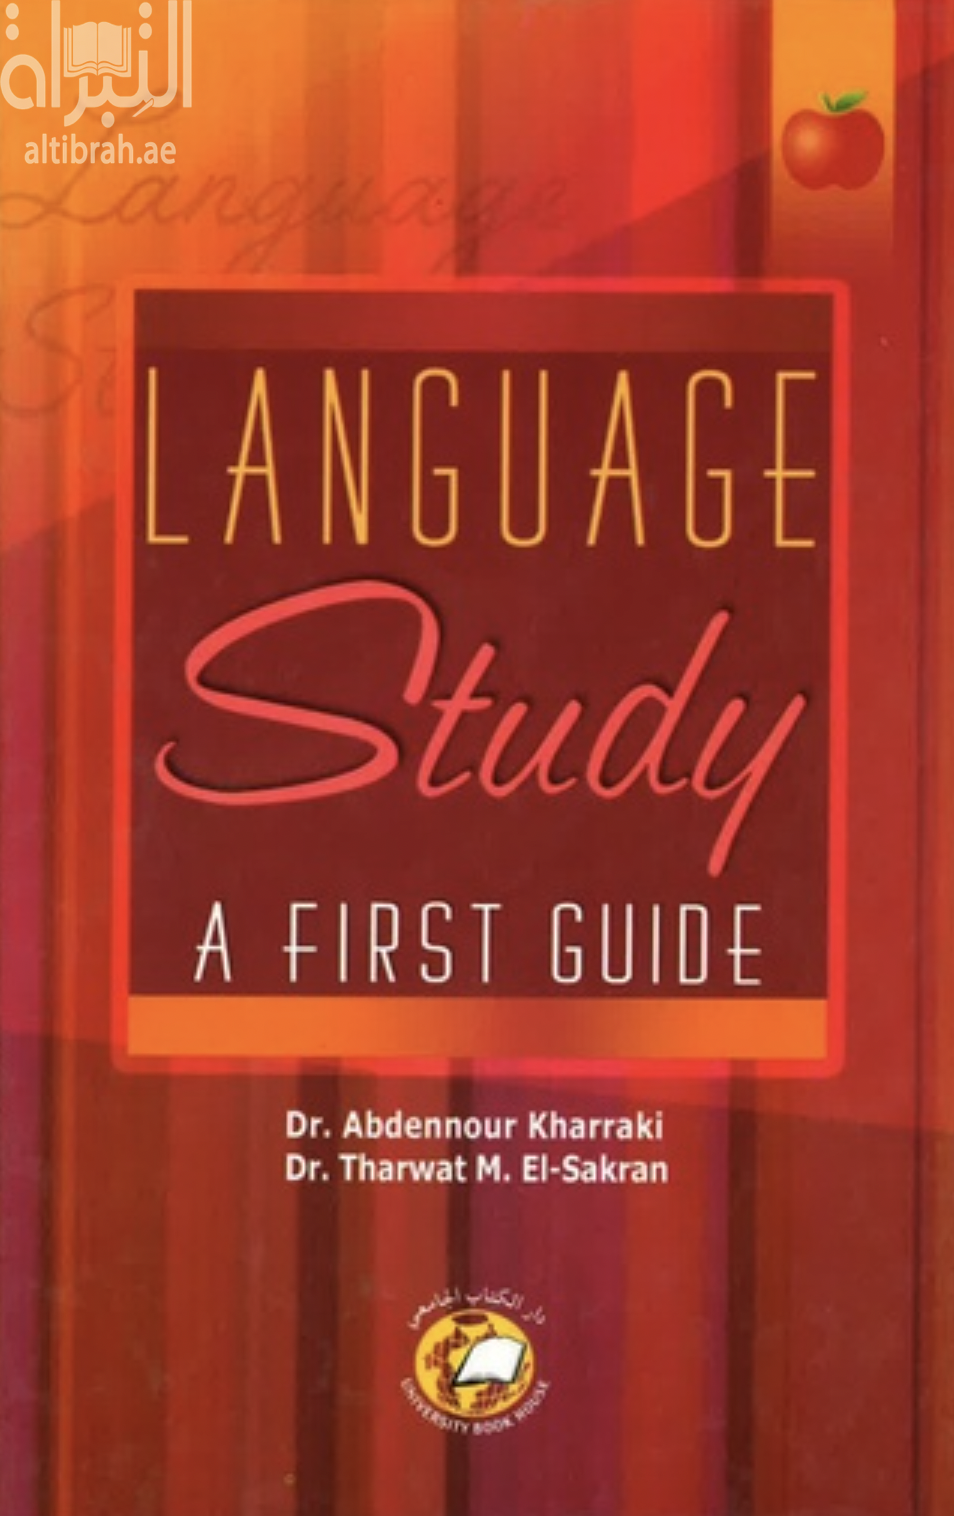 Languag Study a First Guide